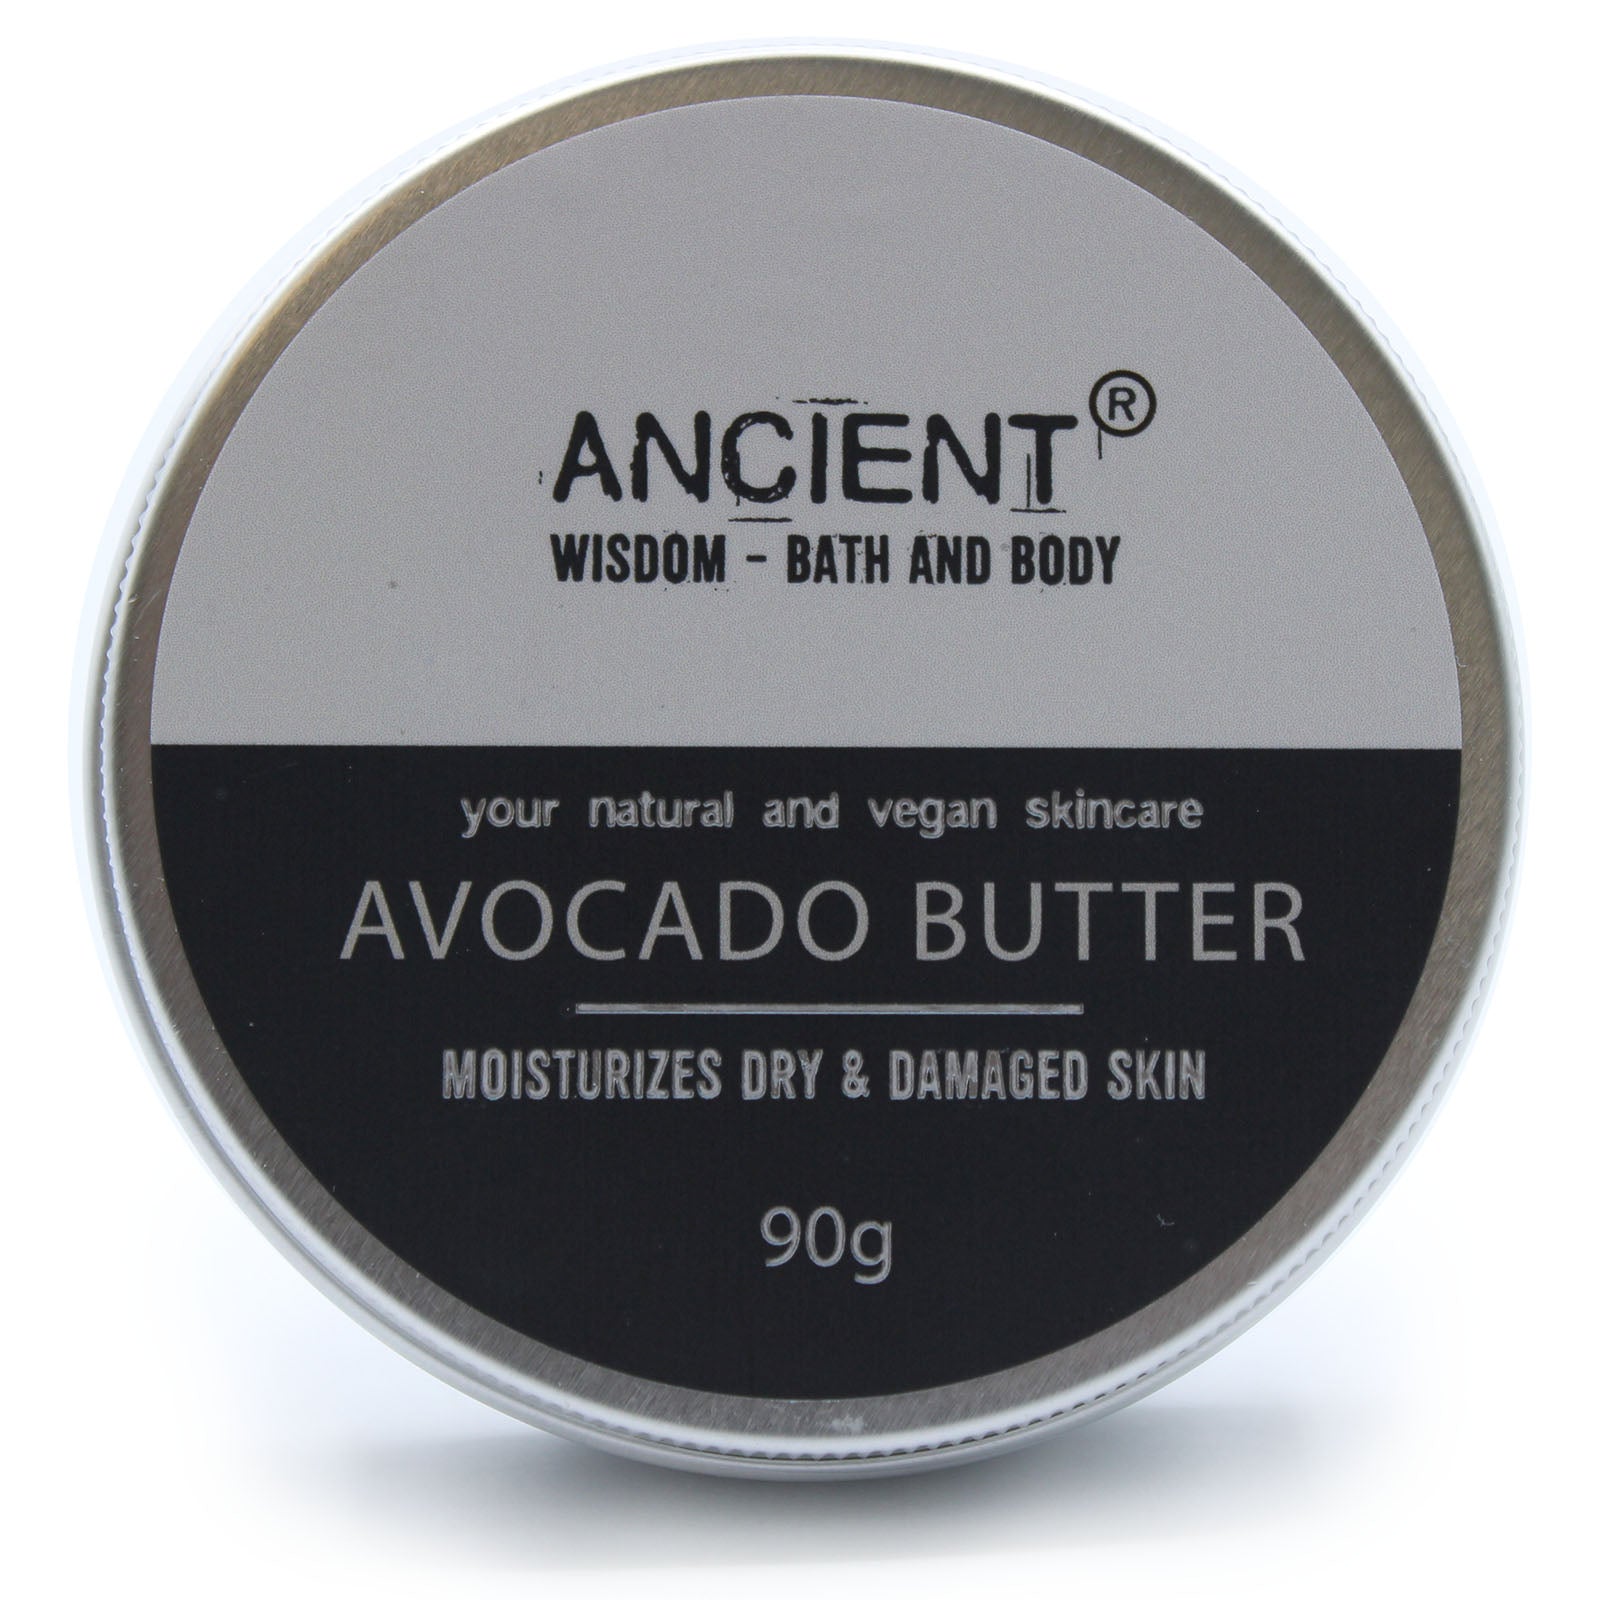 View Pure Body Butter 90g Avocado Butter information